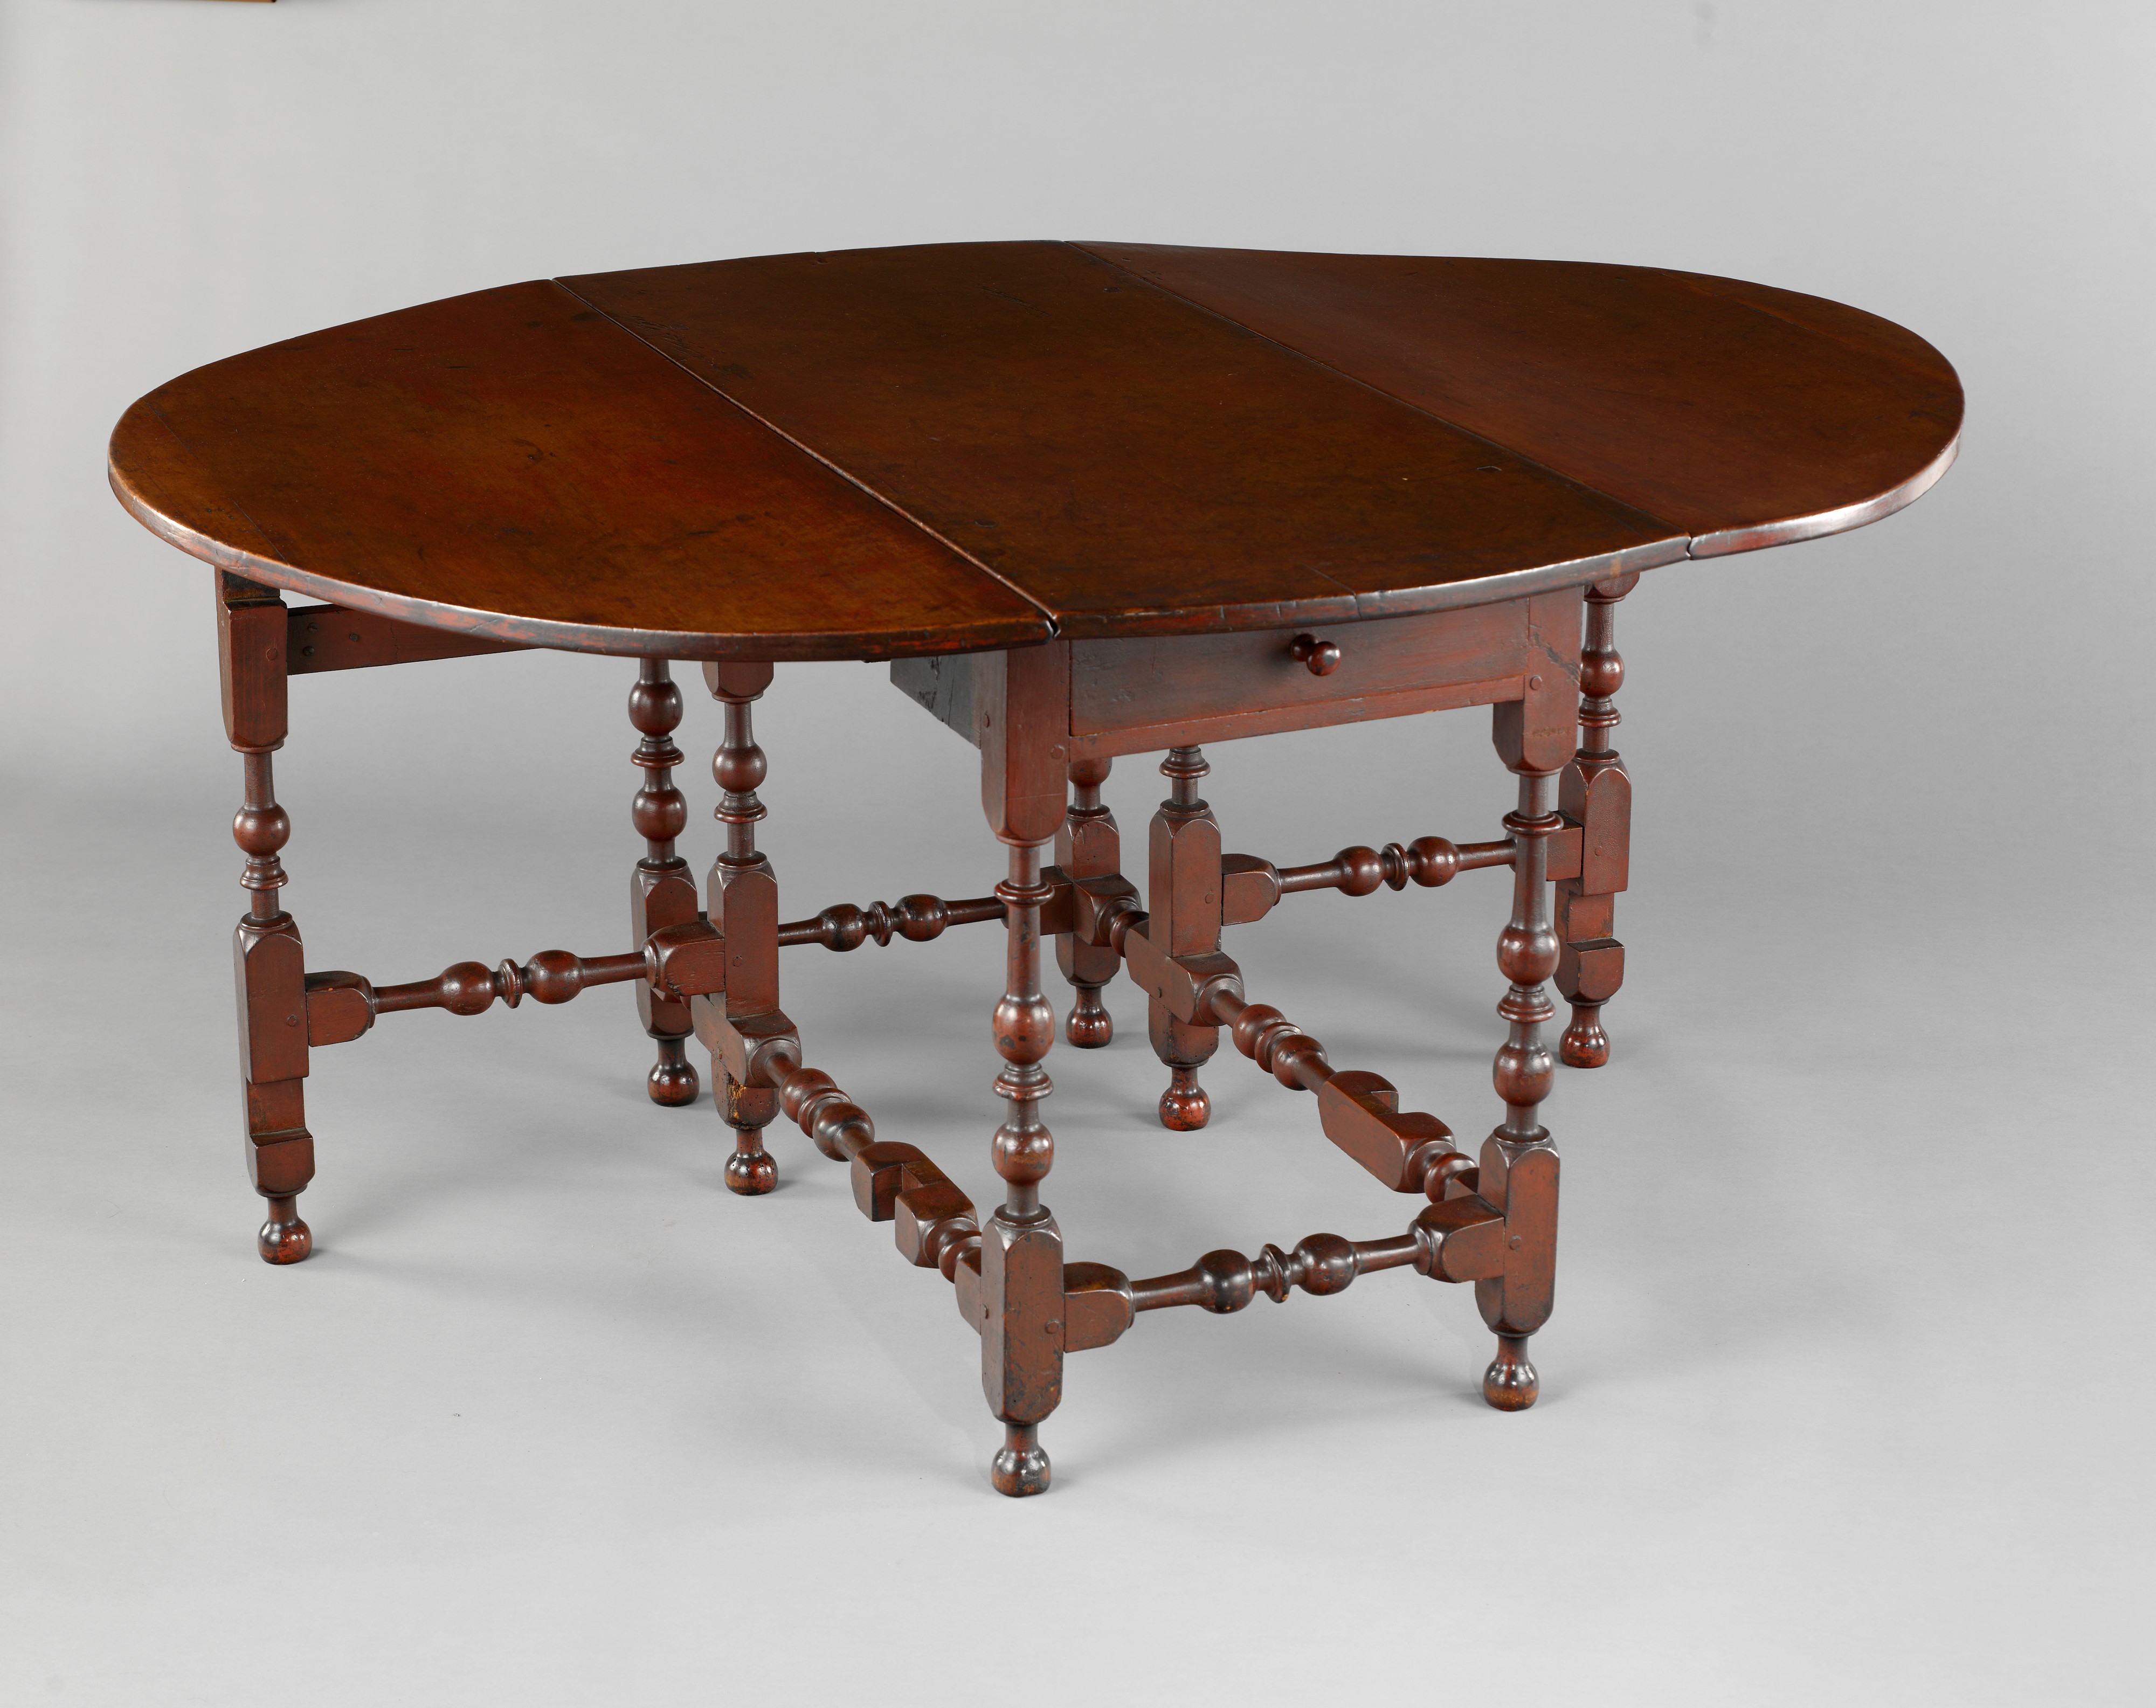 A reddish brown, oval table with two falling leaves. The legs of the table have a globe-shaped base, and a long, straight, tapering neck with a pronounced ring at the top. Two of the legs are open, like gates, to support the leaves.